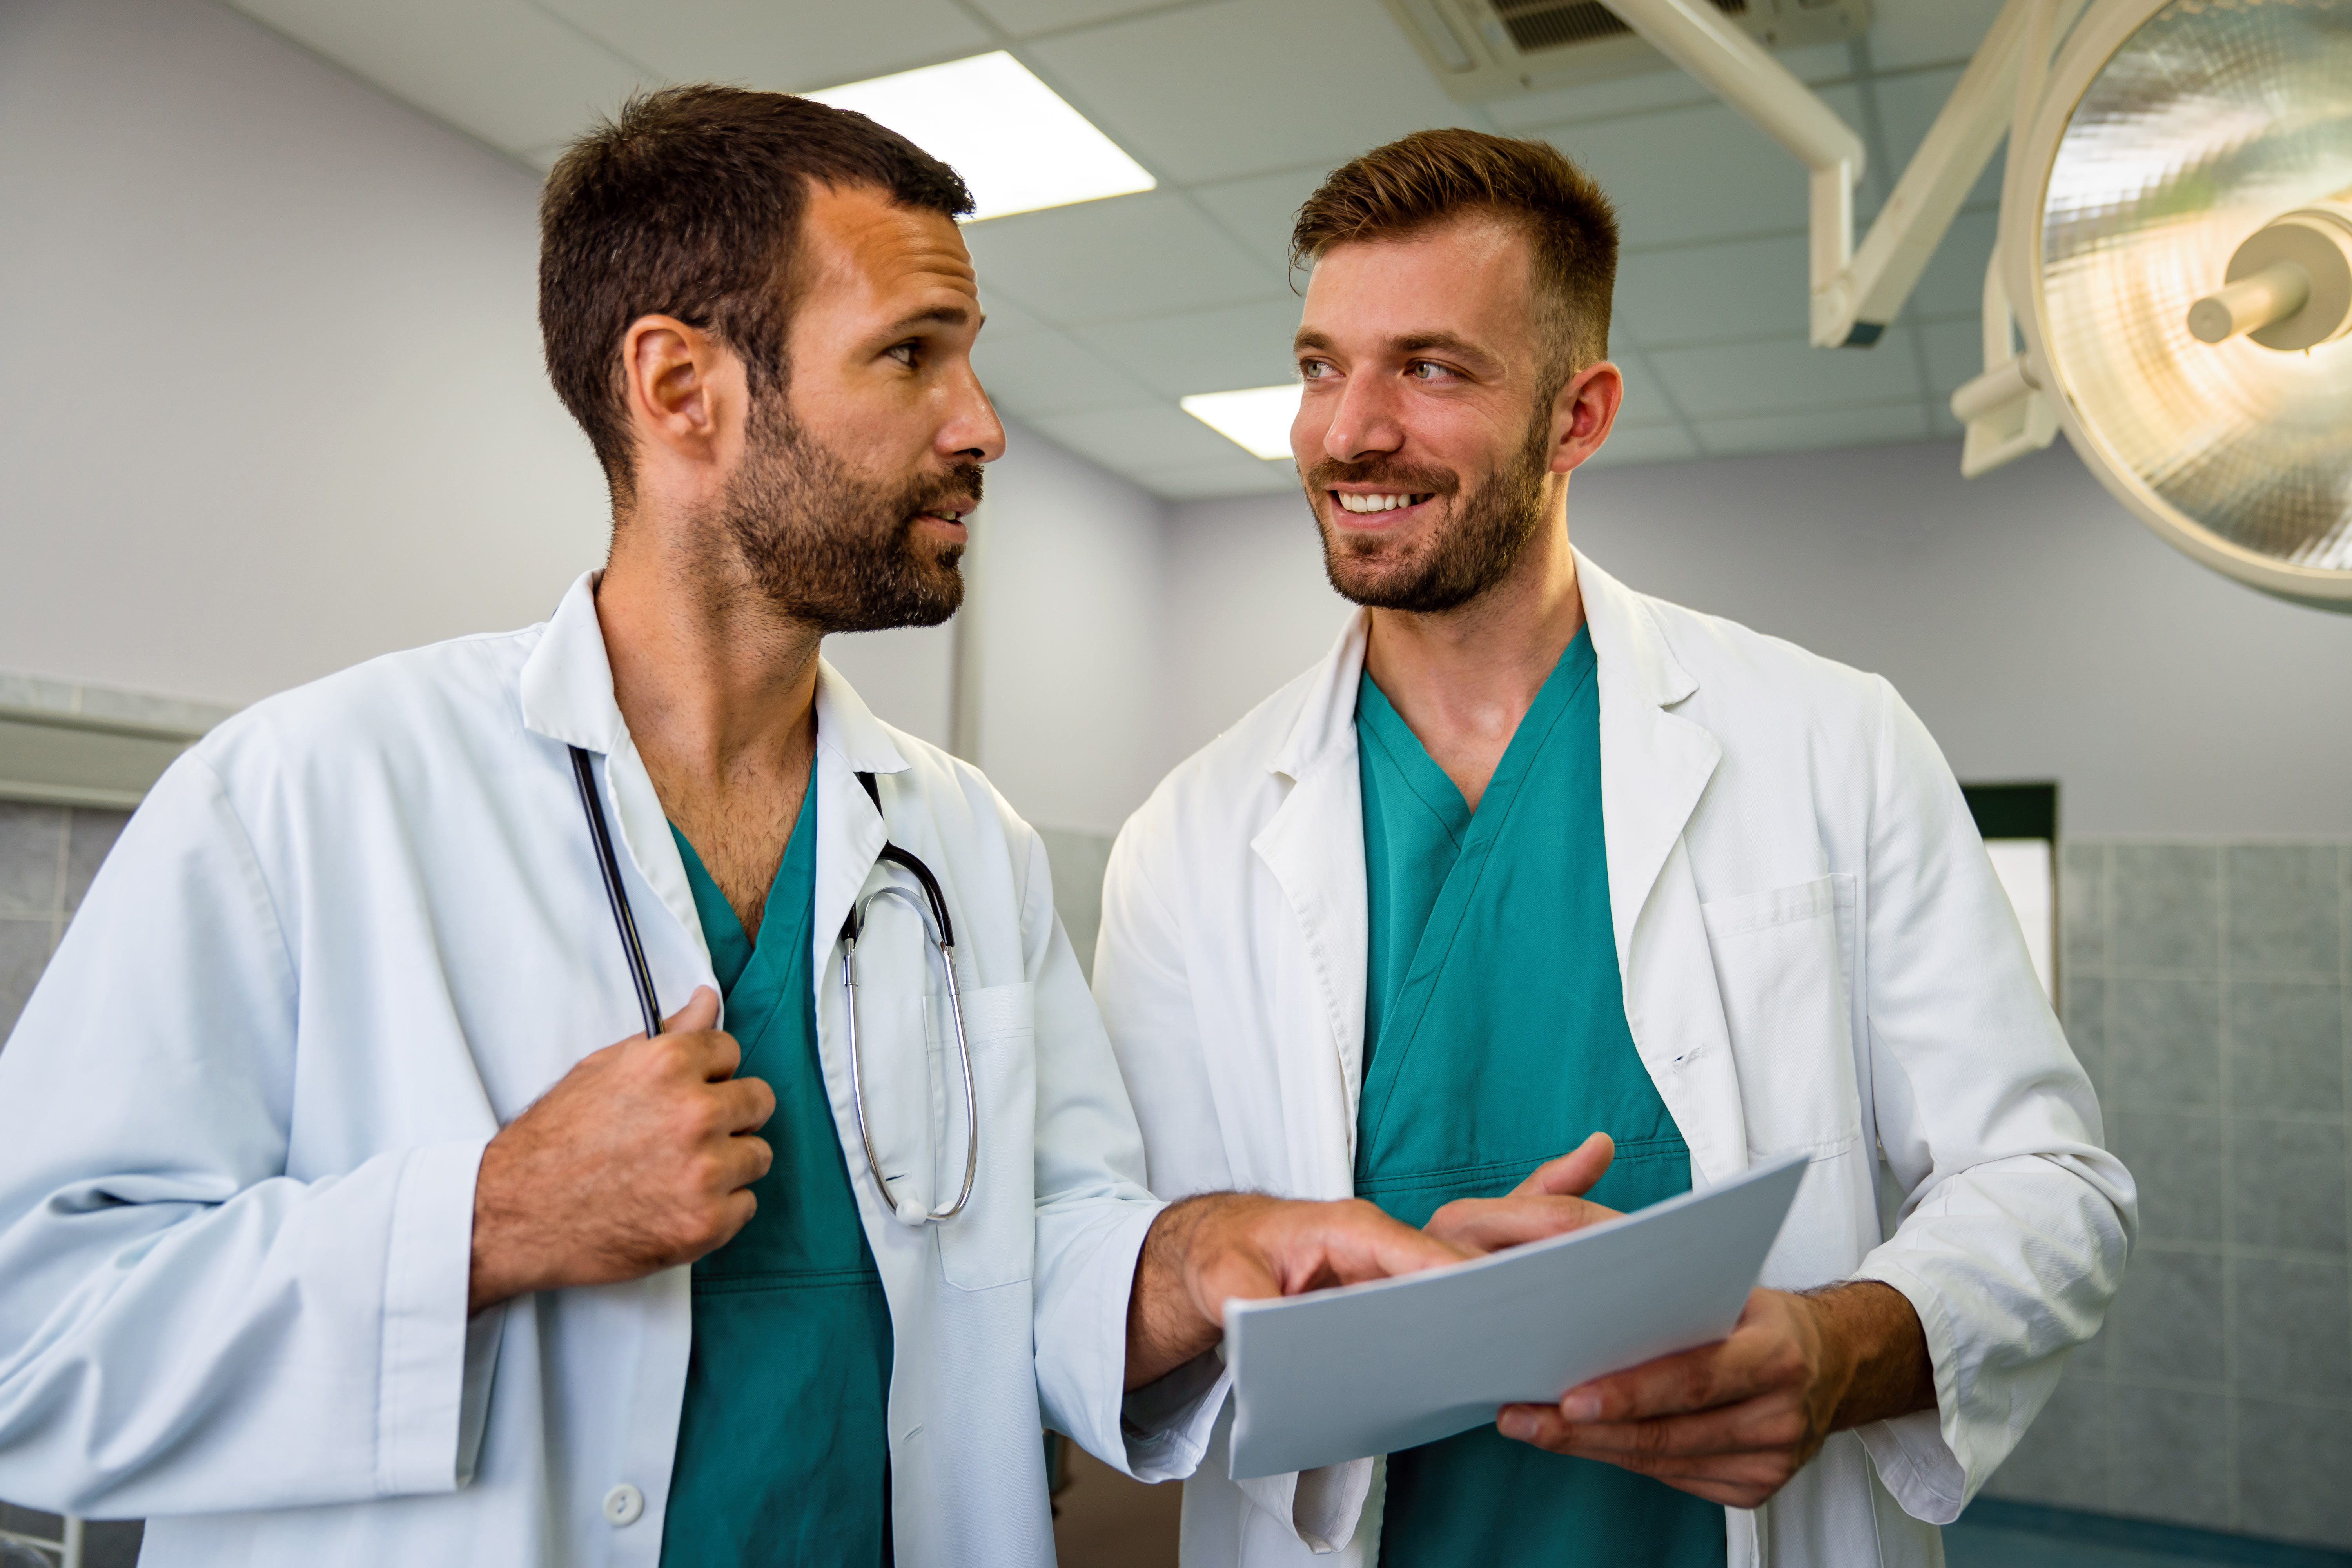 Two doctors discussing about patient records